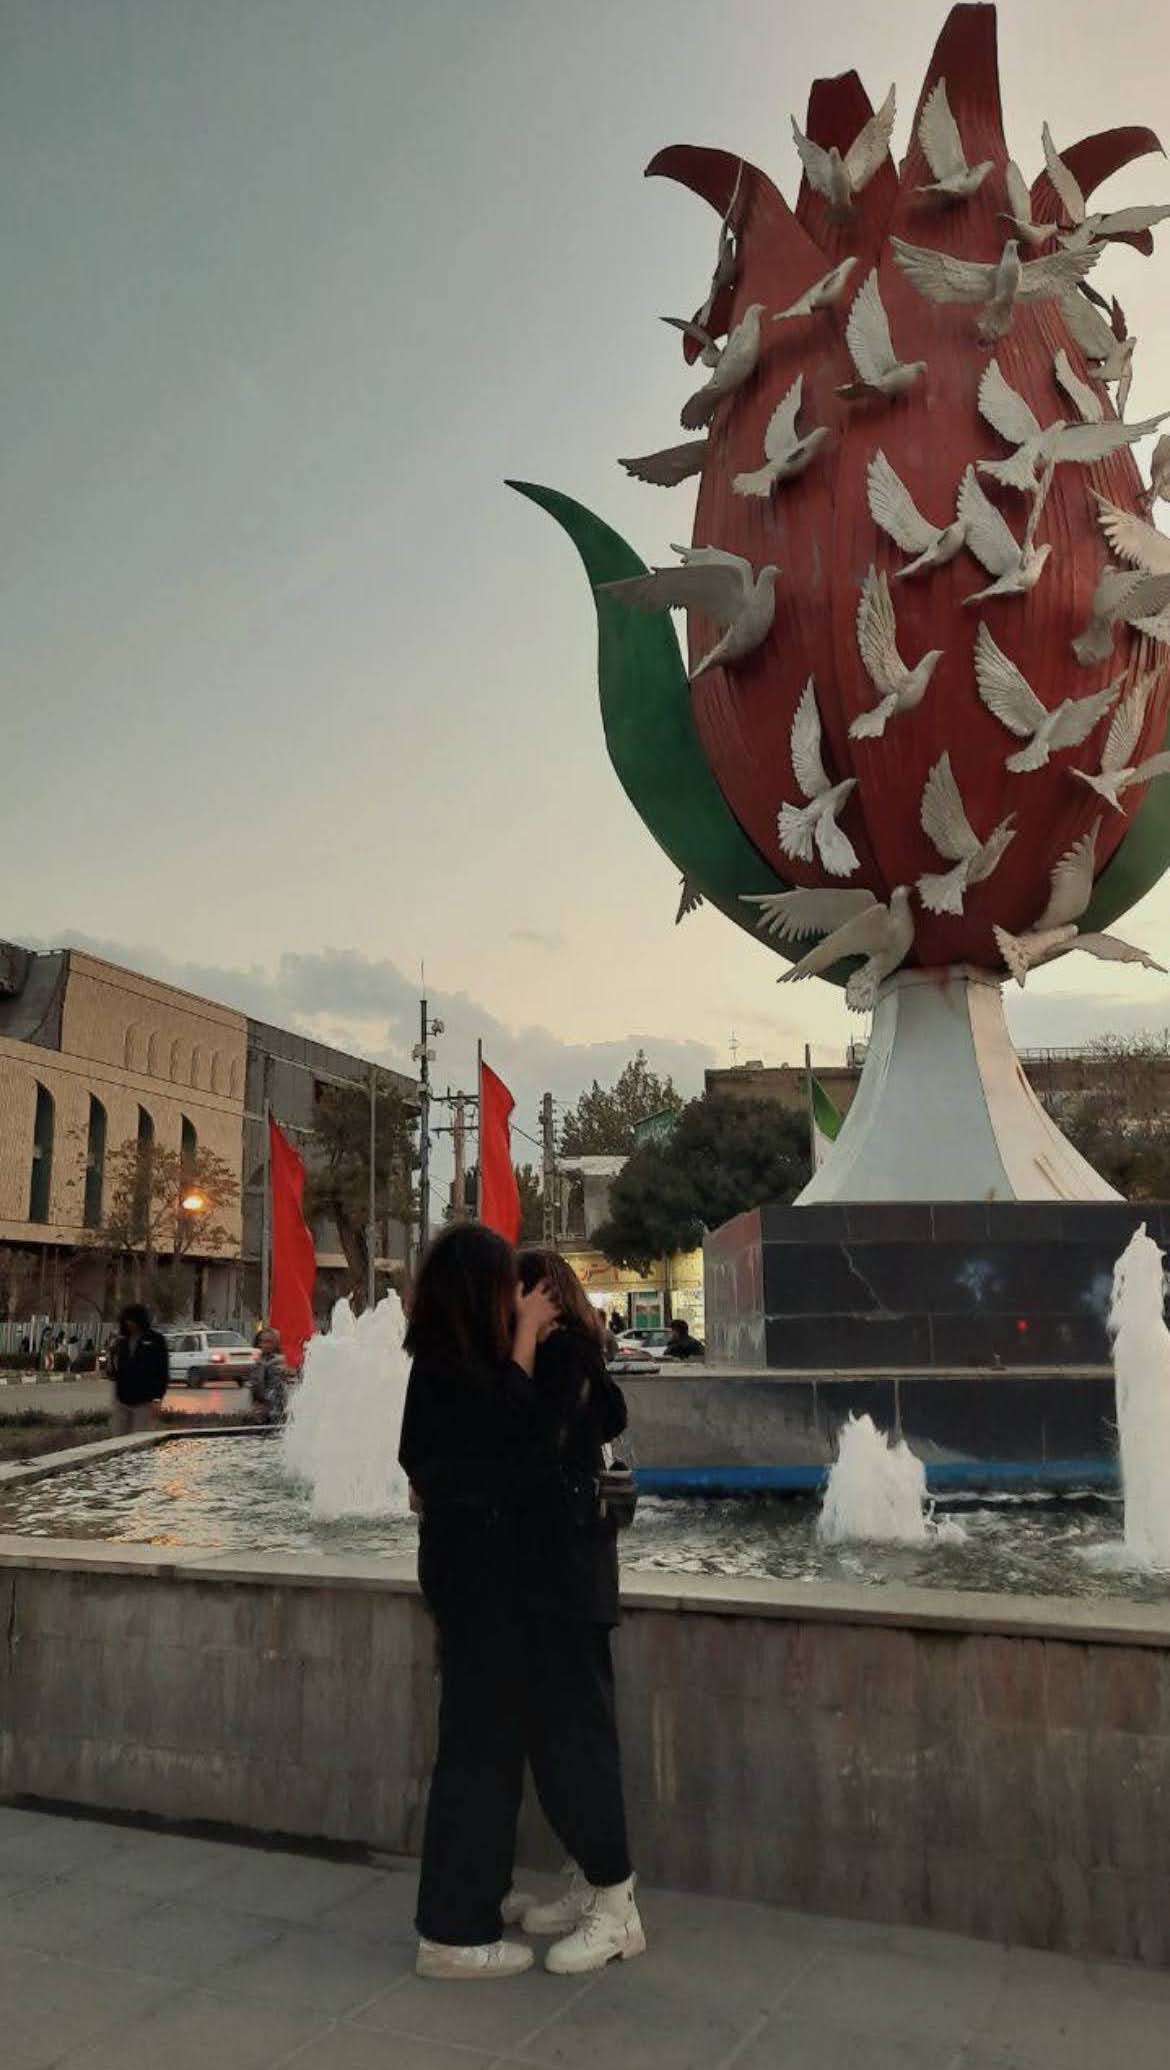 An archived image taken from an anonymous social media source. In the photo are two anonymous women, hiding each other's faces, facing each other, all dressed in black with white shoes. They are in the midst of an intimate embrace and kiss out in public, in what seems to be a common square. They are standing right by a large water fountain that has a red flower covered in white doves as a centerpiece. Red banners and people in the distant background can be seen. This is a photo taken to demonstrate queer resistance.